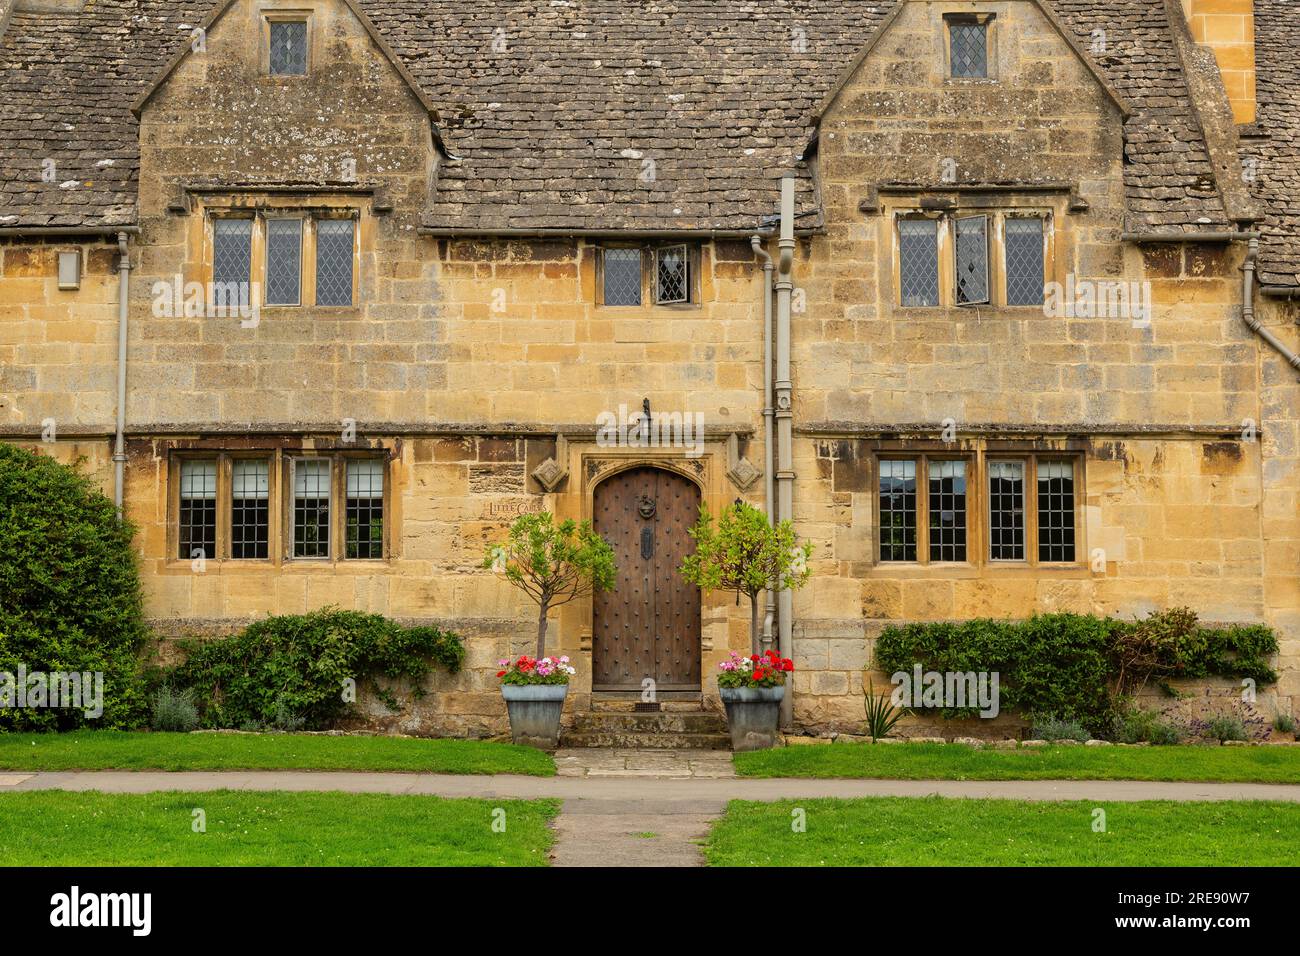 Grand House im Dorf Broadway, Worcestershire, England, in der Gegend Cotwolds von Oustanding Natural Beauty. Stockfoto